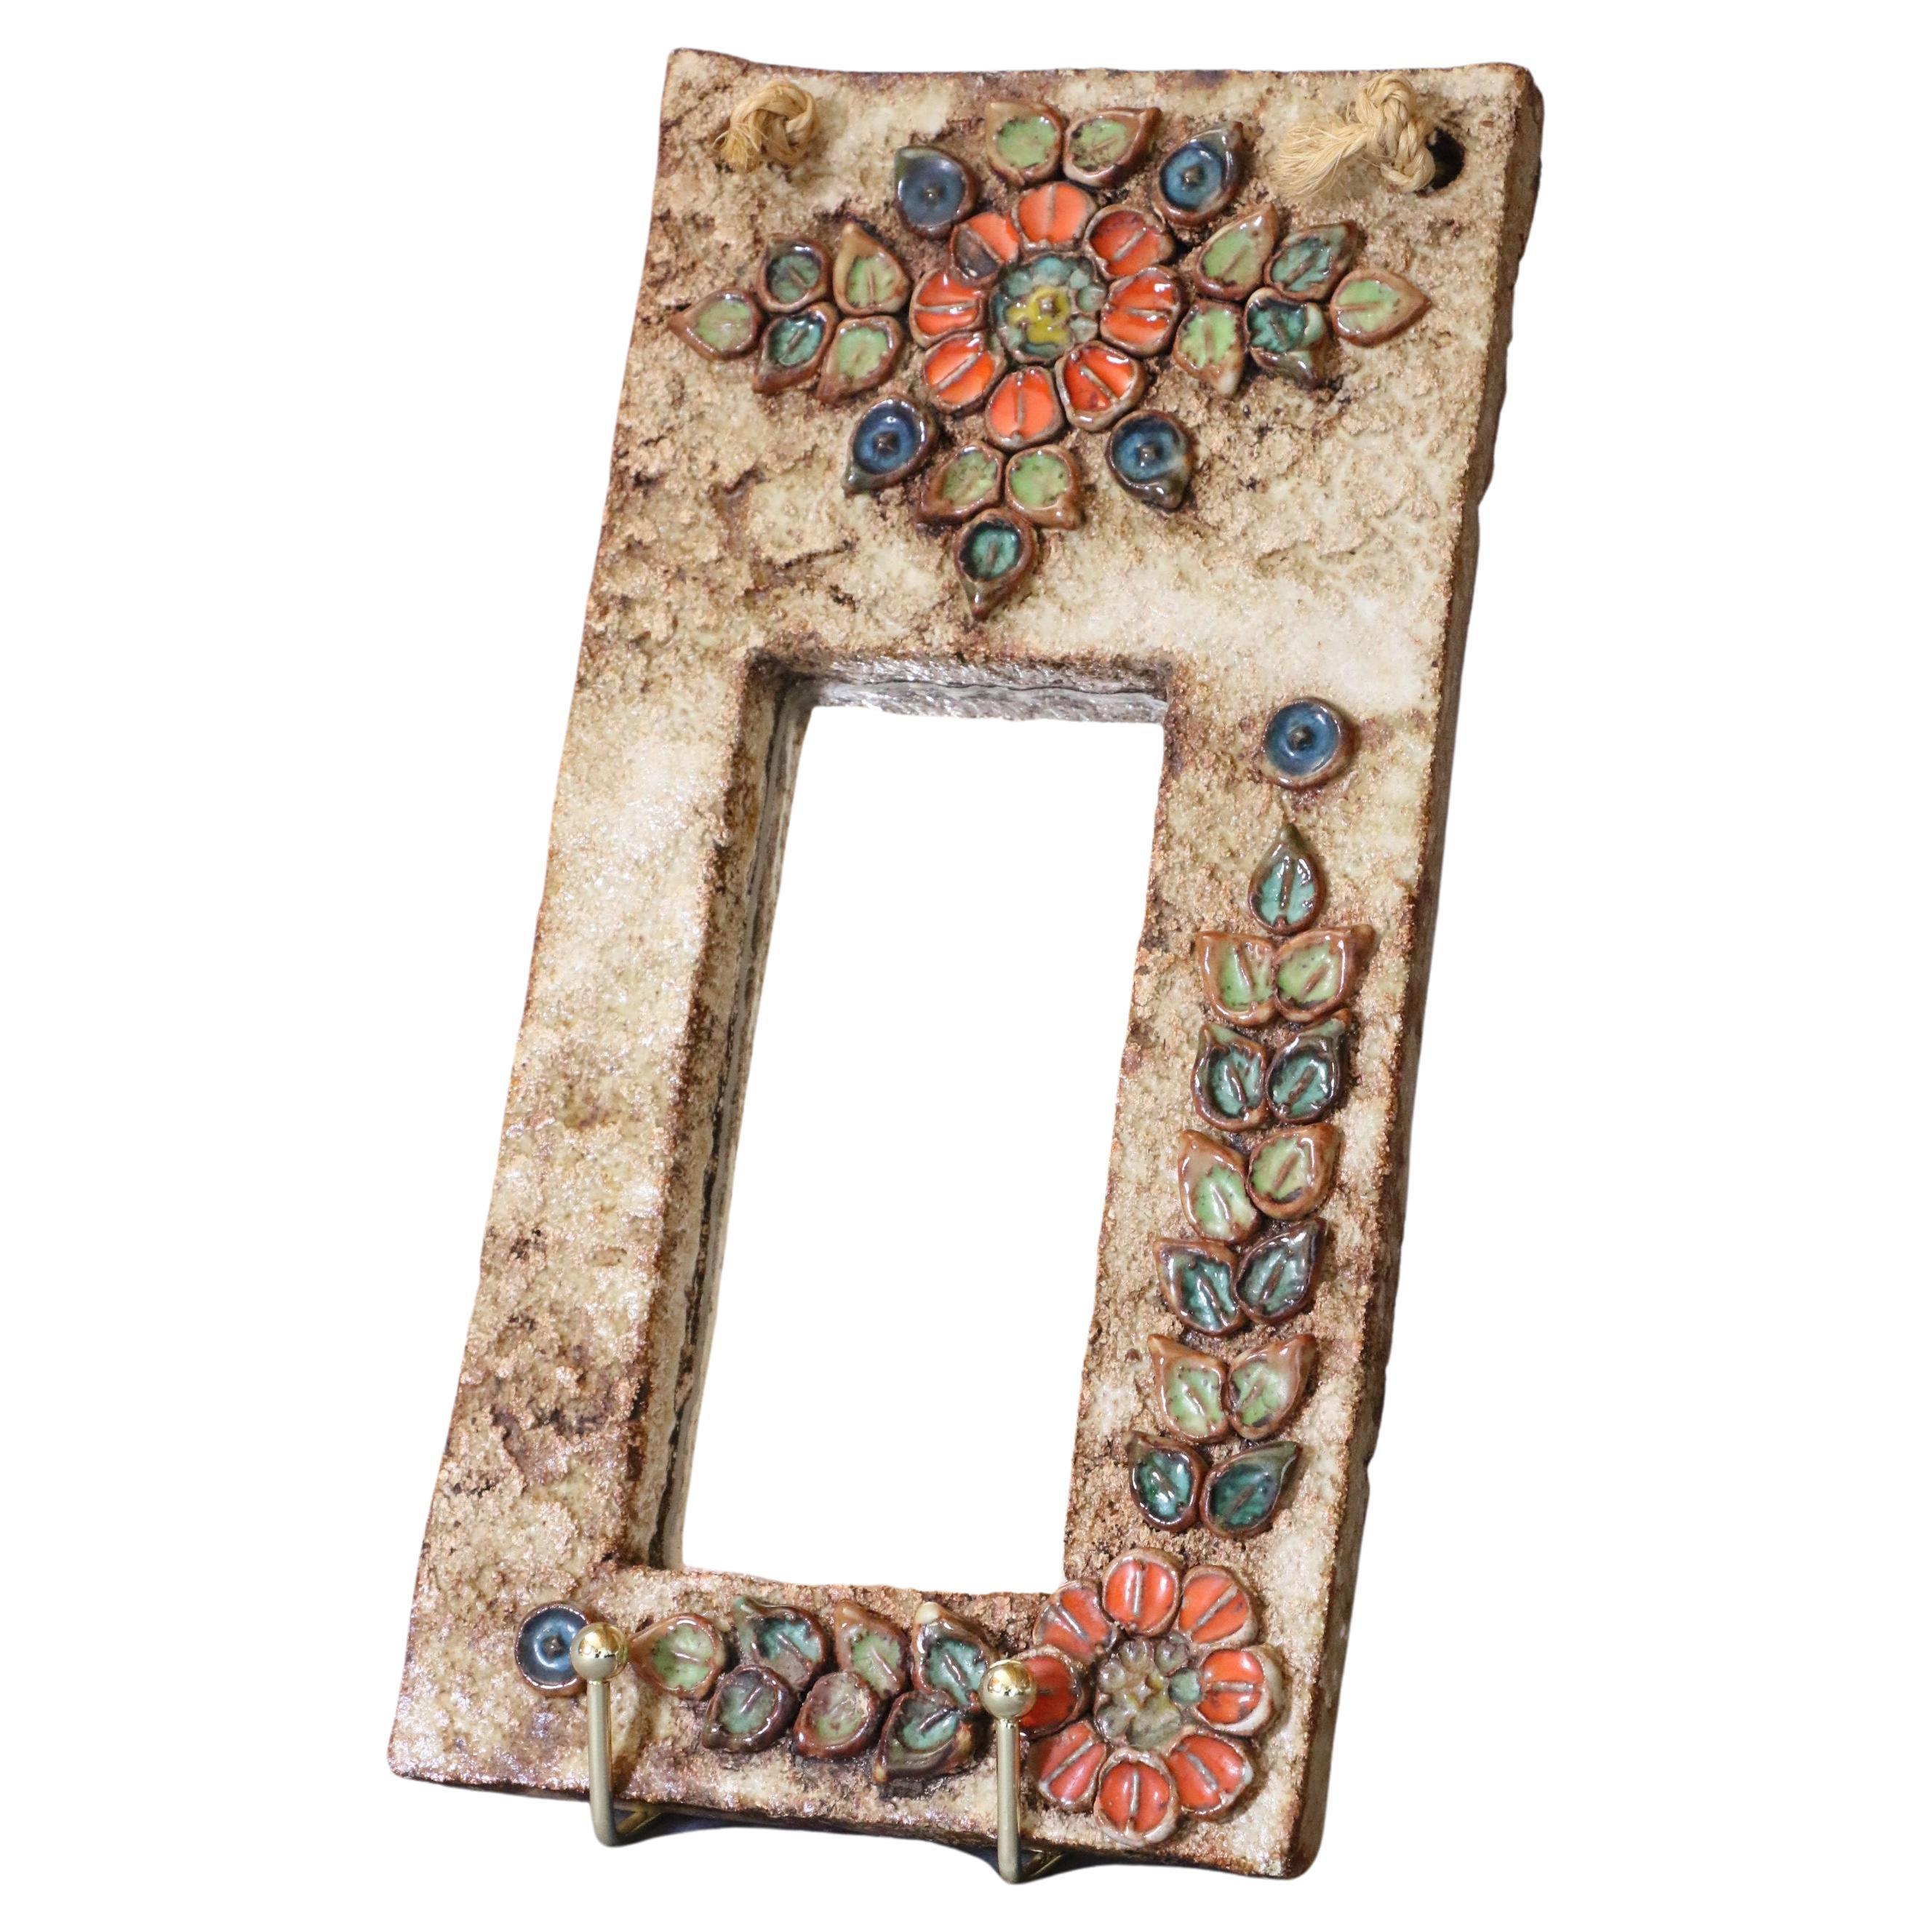 French hanging ceramic mirror - Vallauris, France - 1950s
Attributed to La Roue-Vallauris. 

Ochre coloured glazed ceramic mirror decorated on the frame with coloured flowers. This pretty mirror, typical of Vallauris mid-century creations, combines